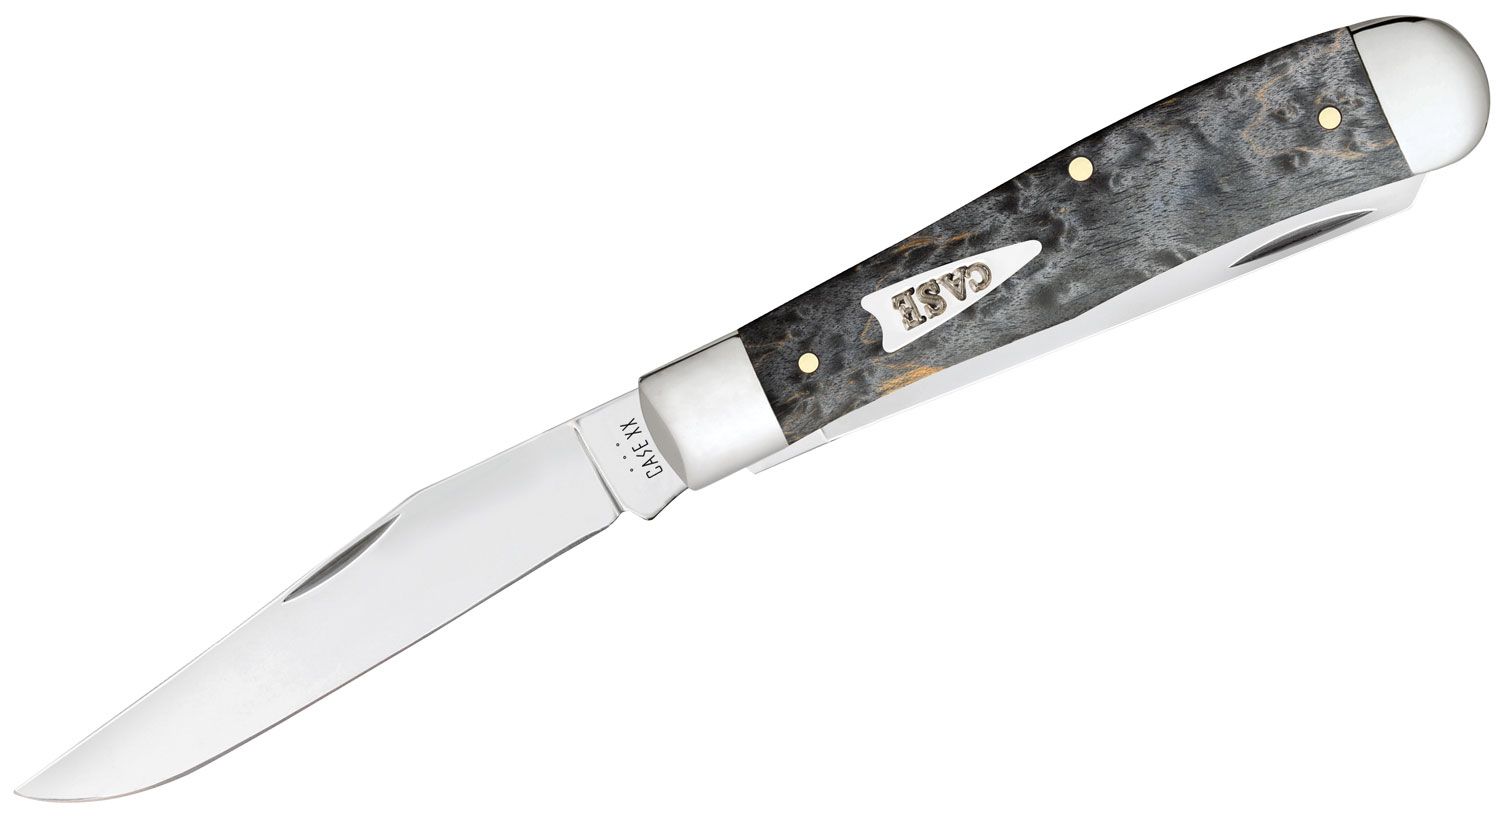 Case Gray Birdseye Maple Trapper Pocket Knife 4.13 Closed (7254 SS) -  KnifeCenter - 11010 - Discontinued